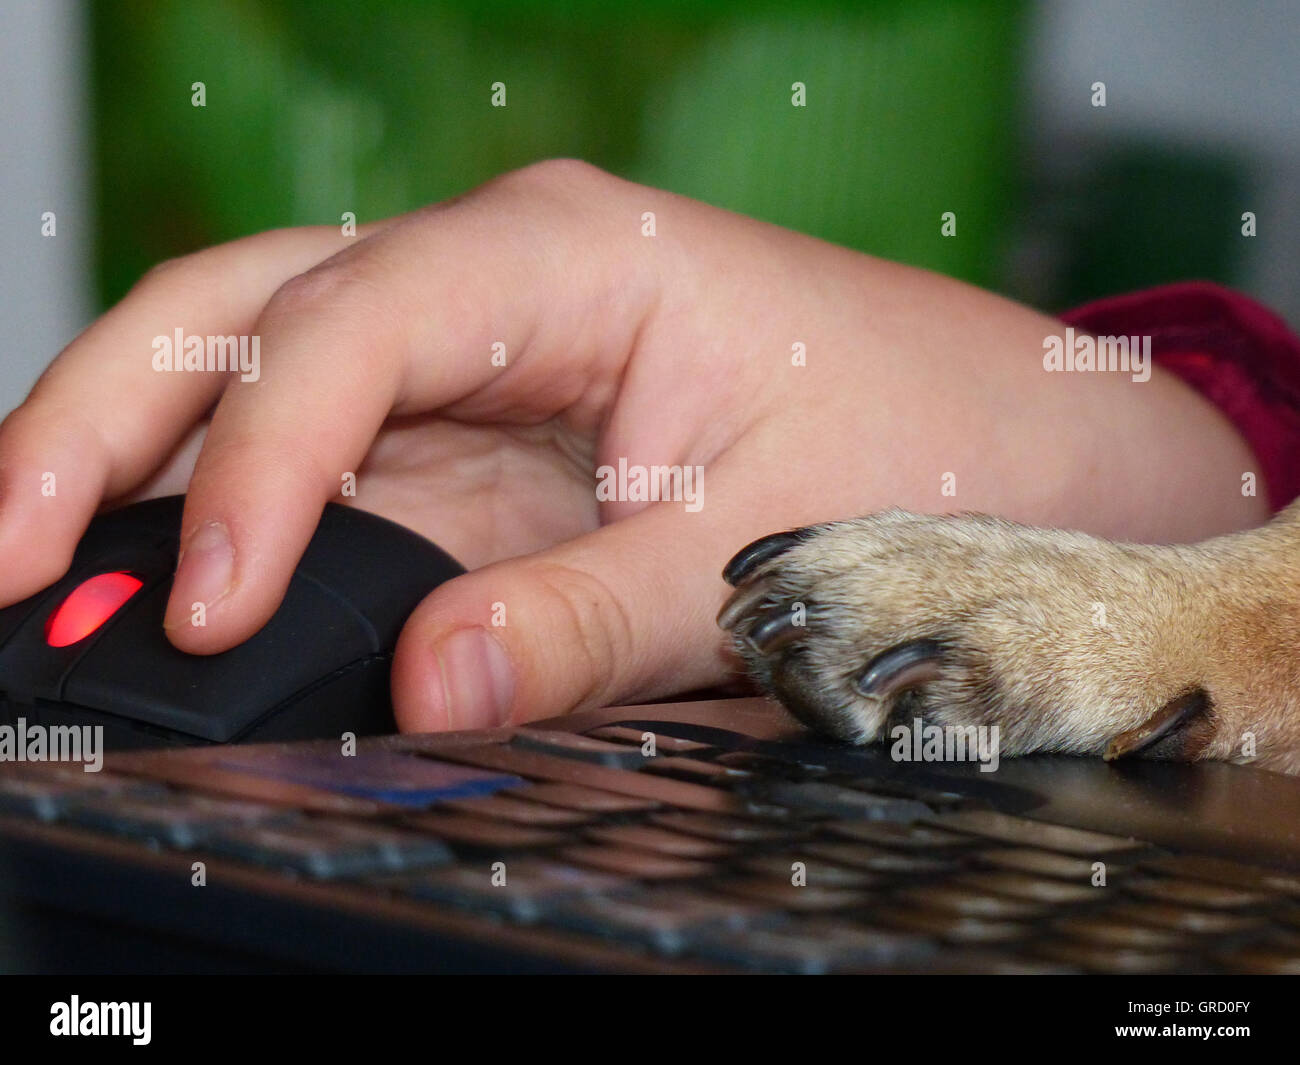 Symbol Teamwork, Human Hand And Dog Paw On A Keyboard, Symbol For Easy Stock Photo